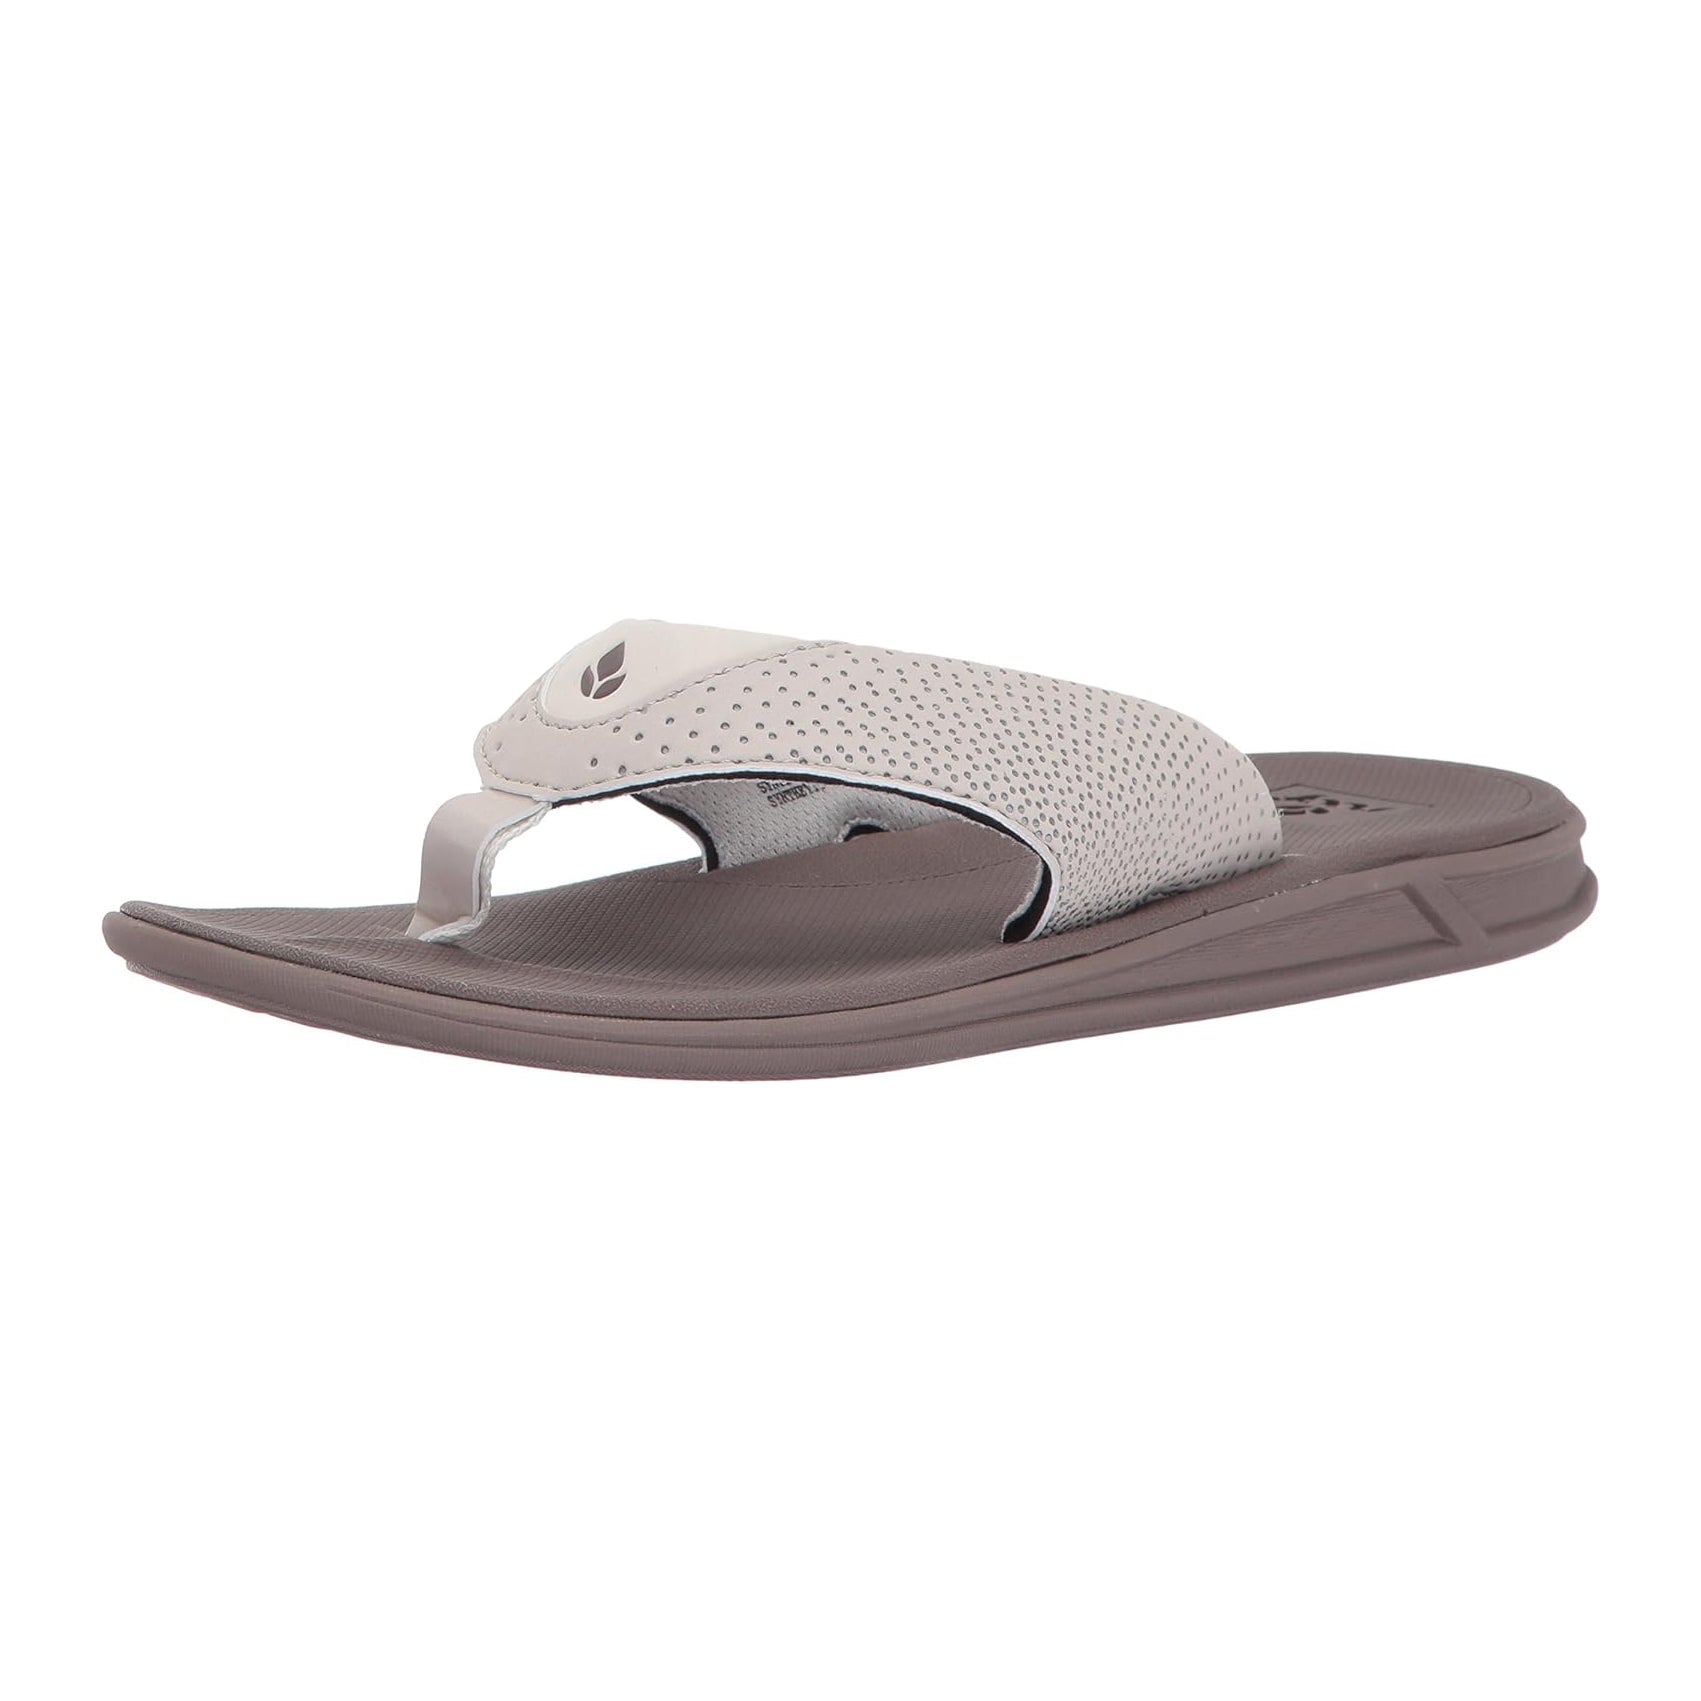 Reef Rover Womens Sandal Silver-Grey 11